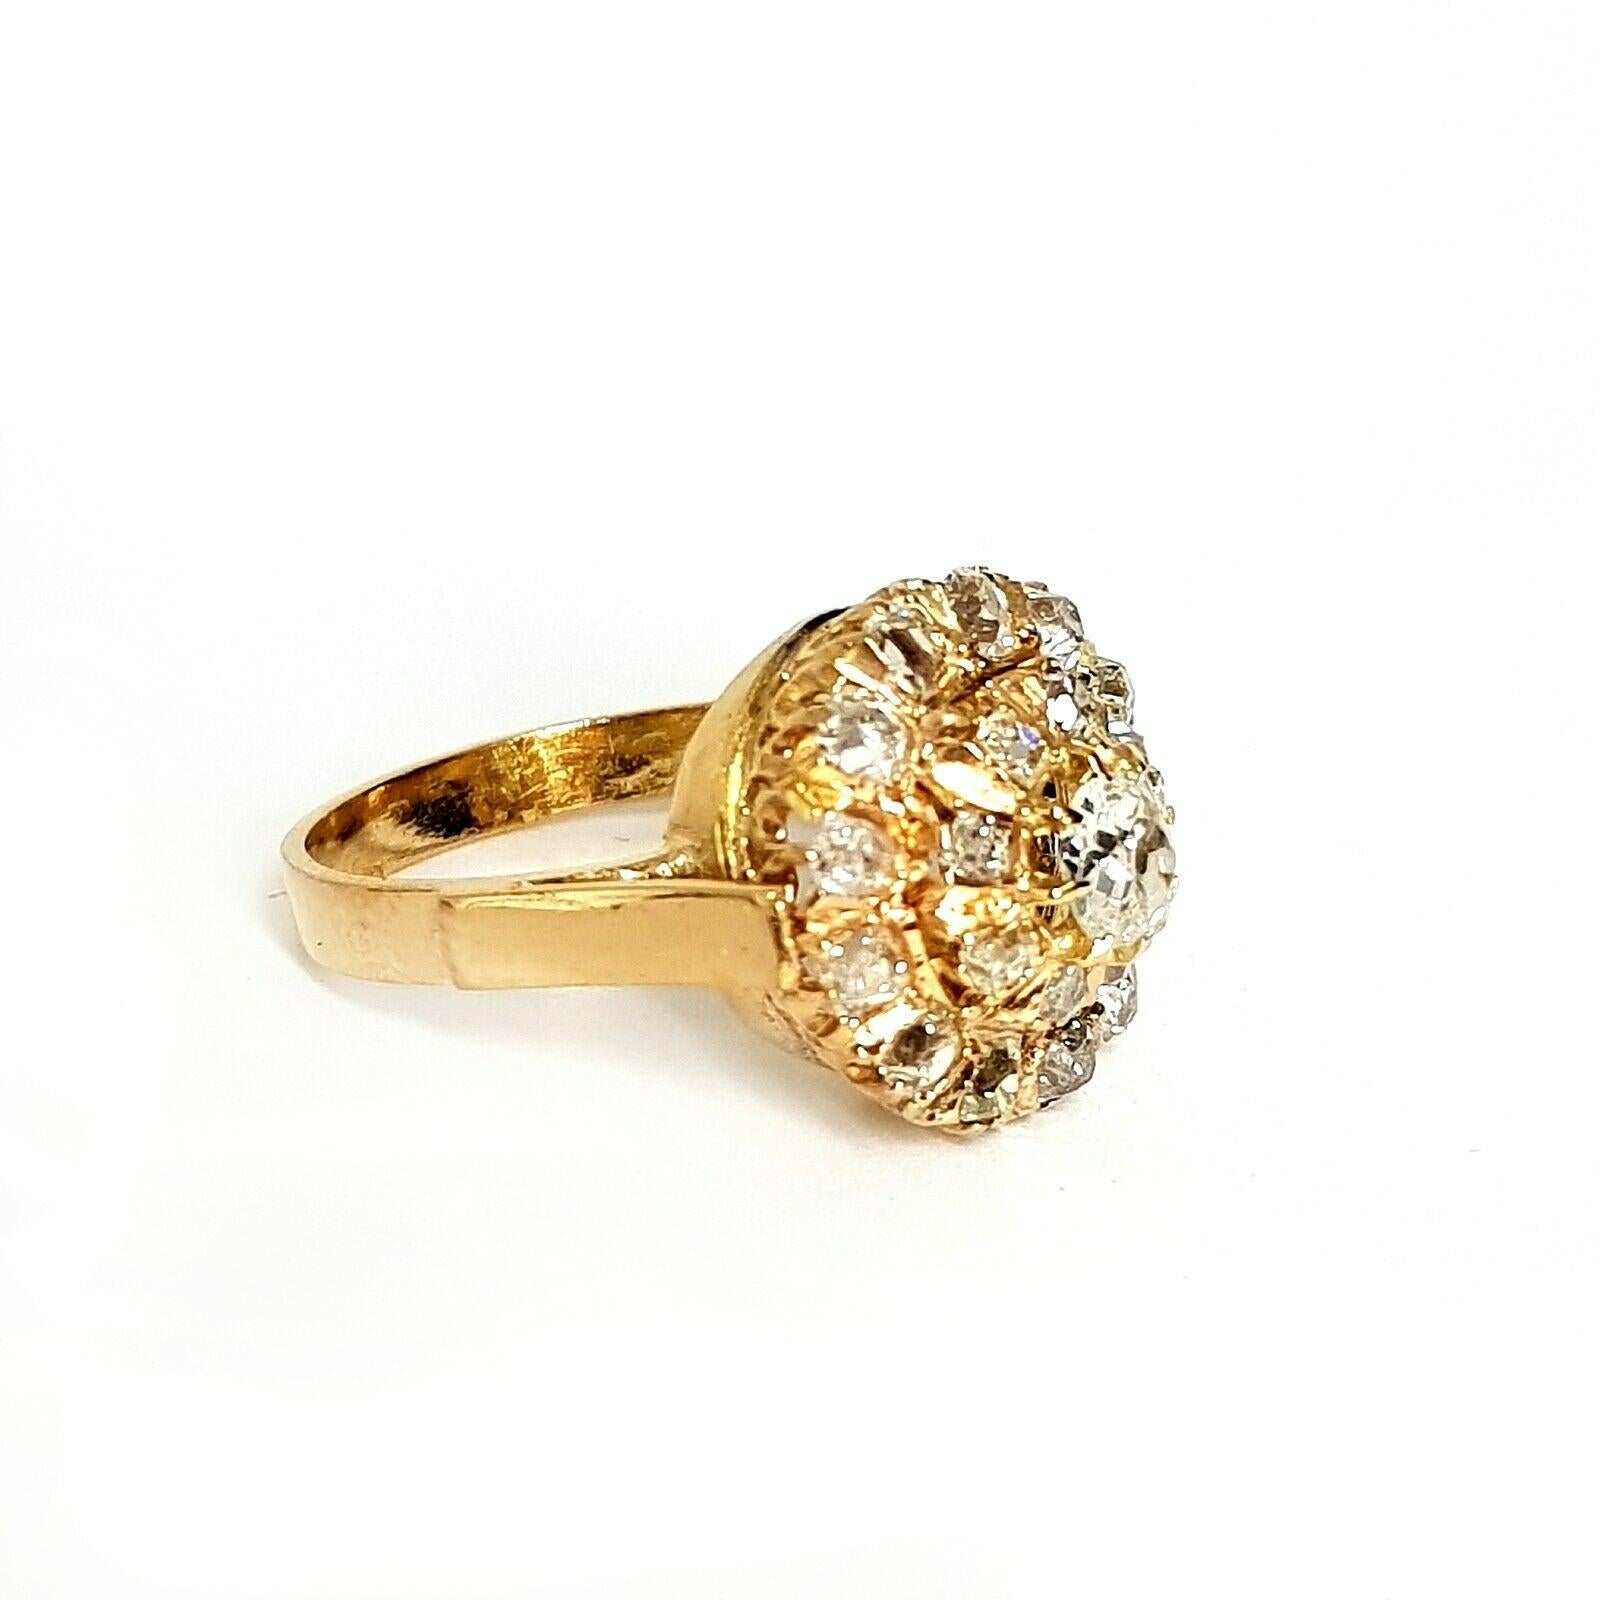  This is beautiful cluster ring features 22 pieces of old european cut diamonds in approximately 0.70 carat total weight, H color and SI2 stone clarity, crafted in 14k yellow gold. The ring is pre-owned and some of the prongs are worn, and one is